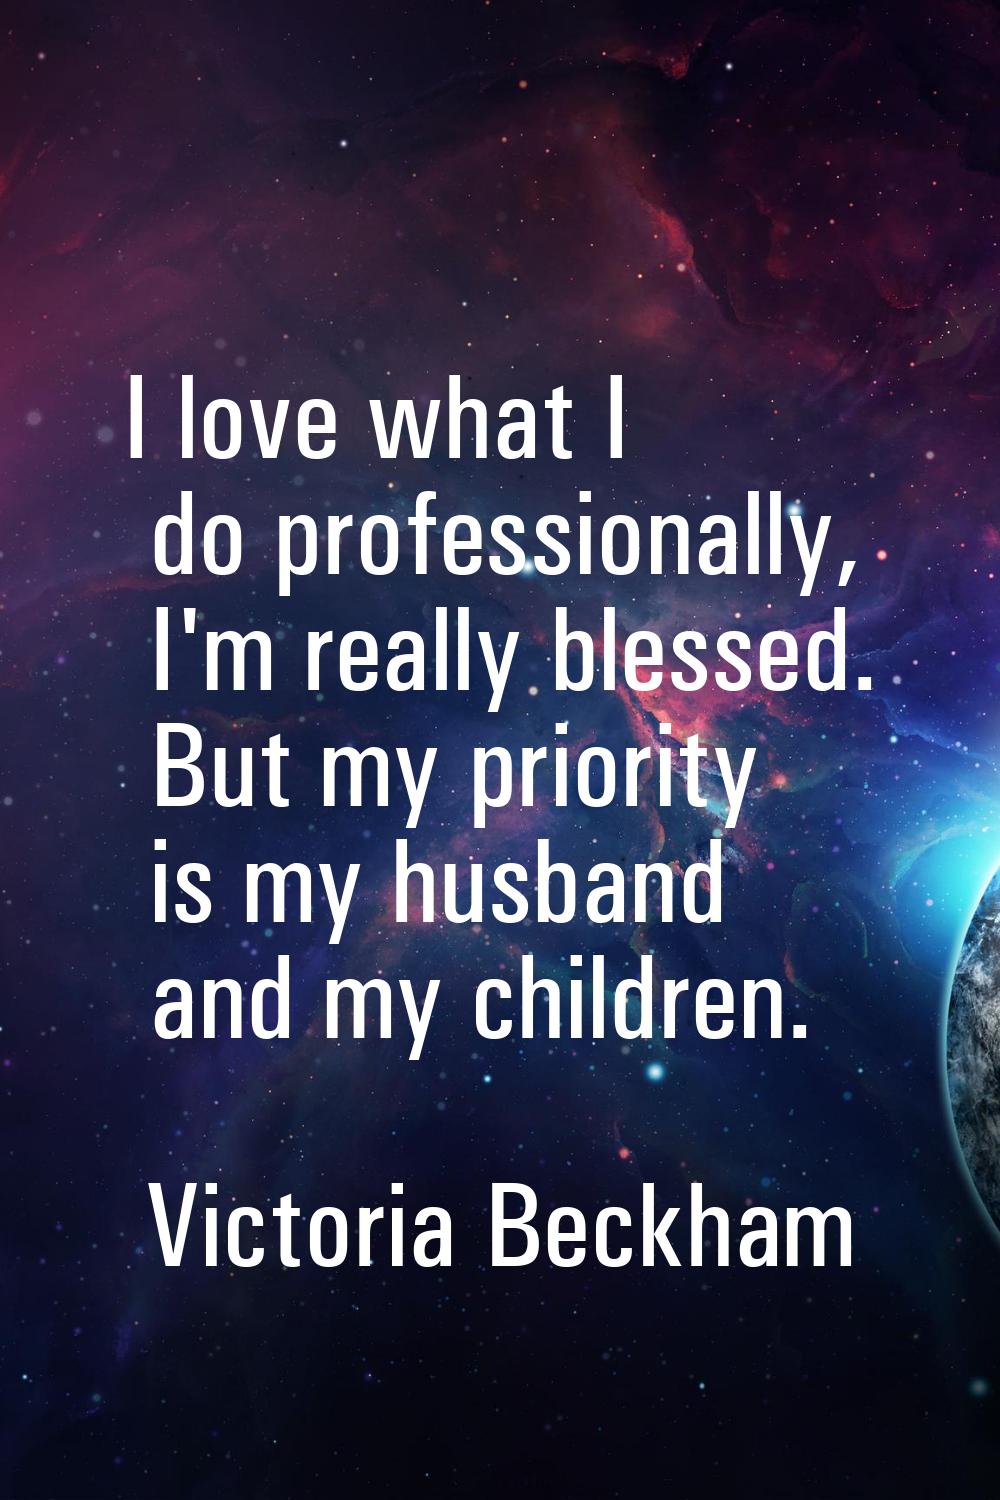 I love what I do professionally, I'm really blessed. But my priority is my husband and my children.